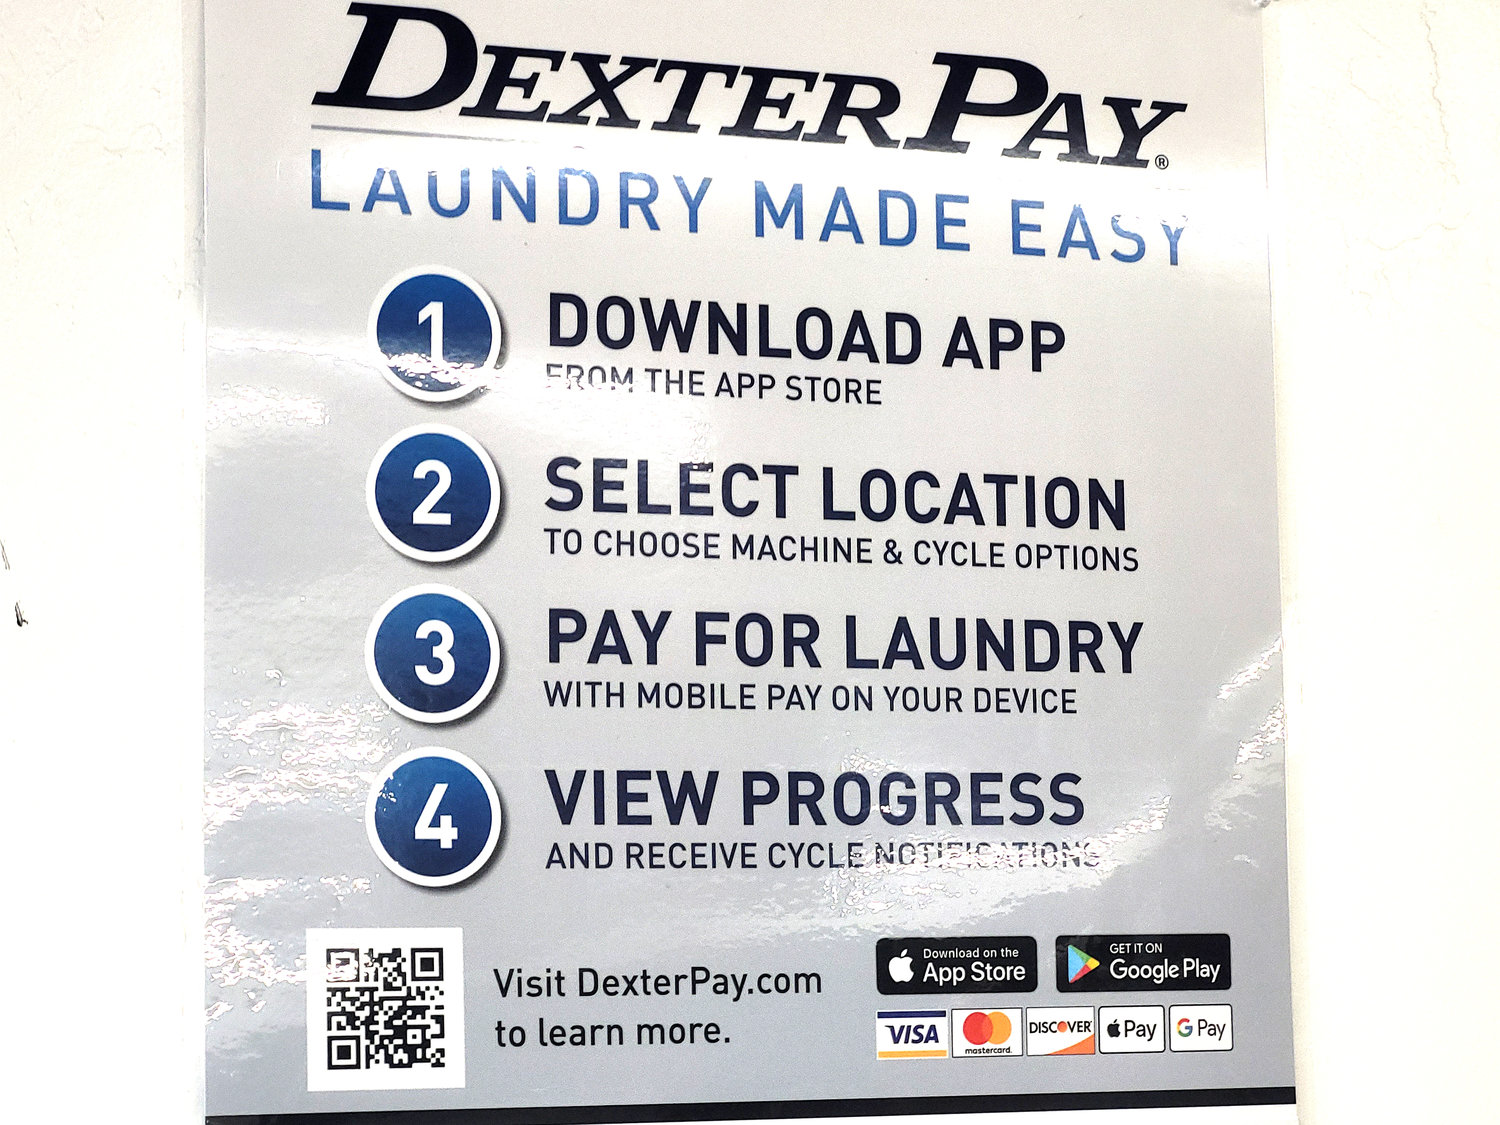 DexterPay is an app that can be downloaded onto phones that allows users to reserve and pay for machines in advance or offsite. Downloading the app also provides savings opportunities for the users. Businesses can use the app to track business costs associated with laundry.